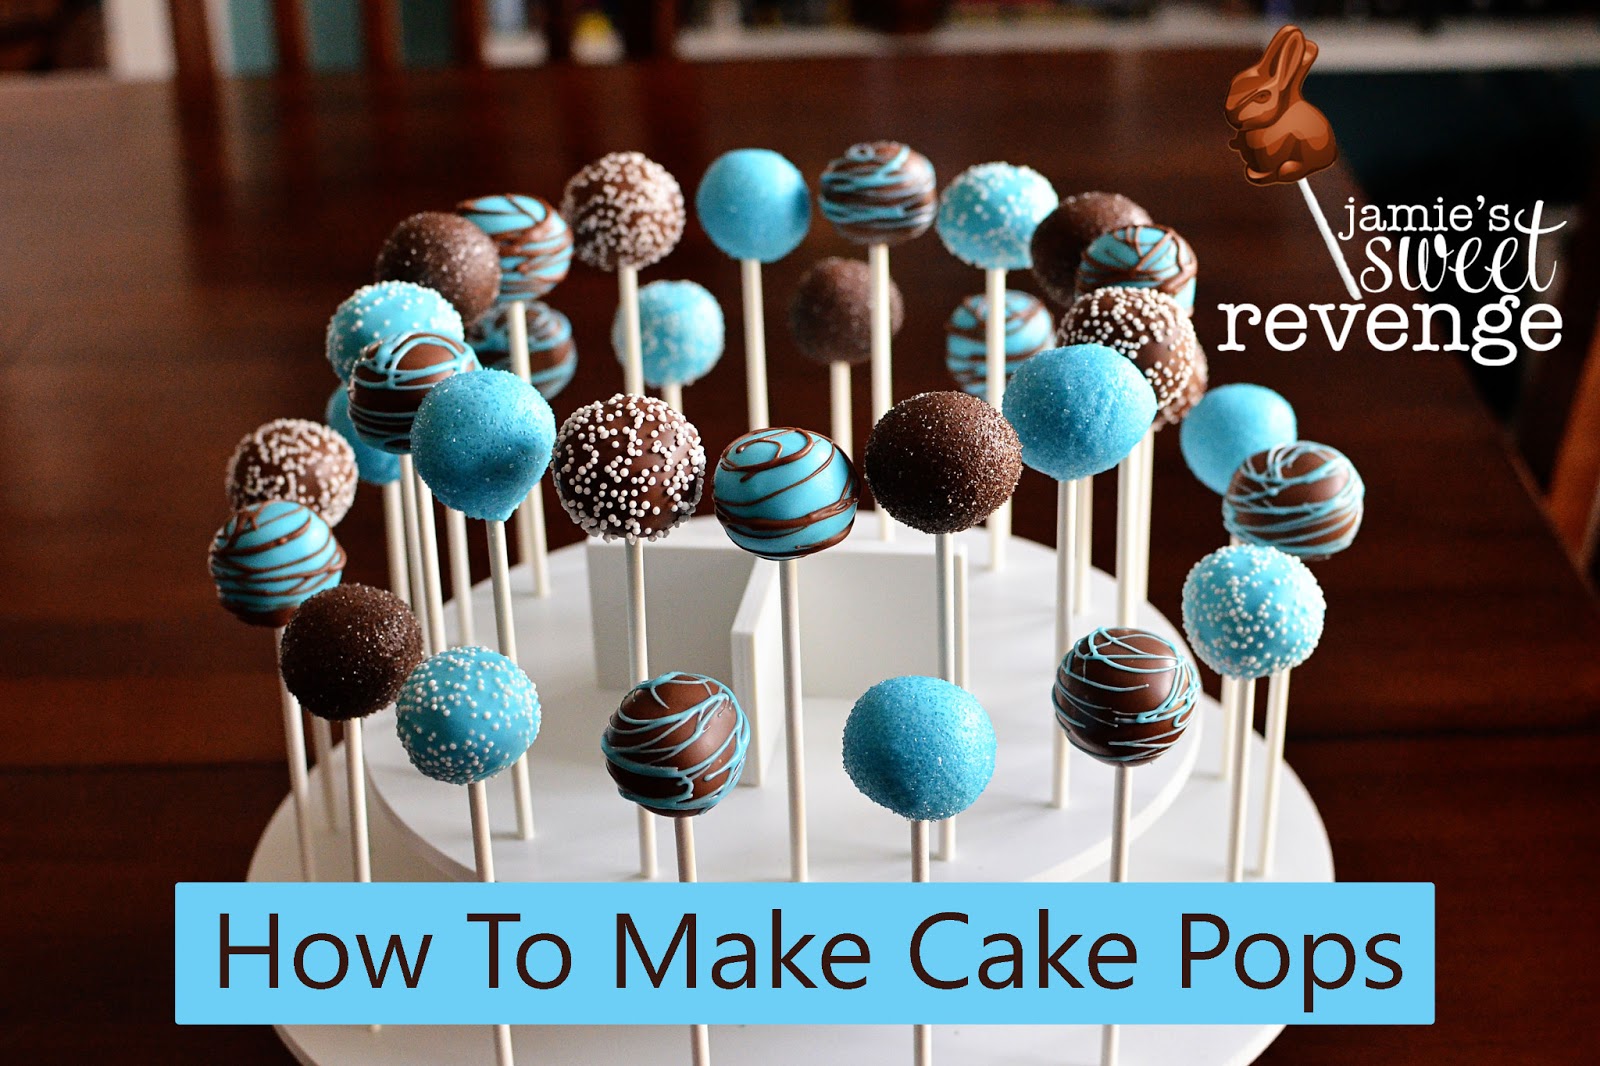 Jamie's Rabbits: The Post About How To Make Cake Pops